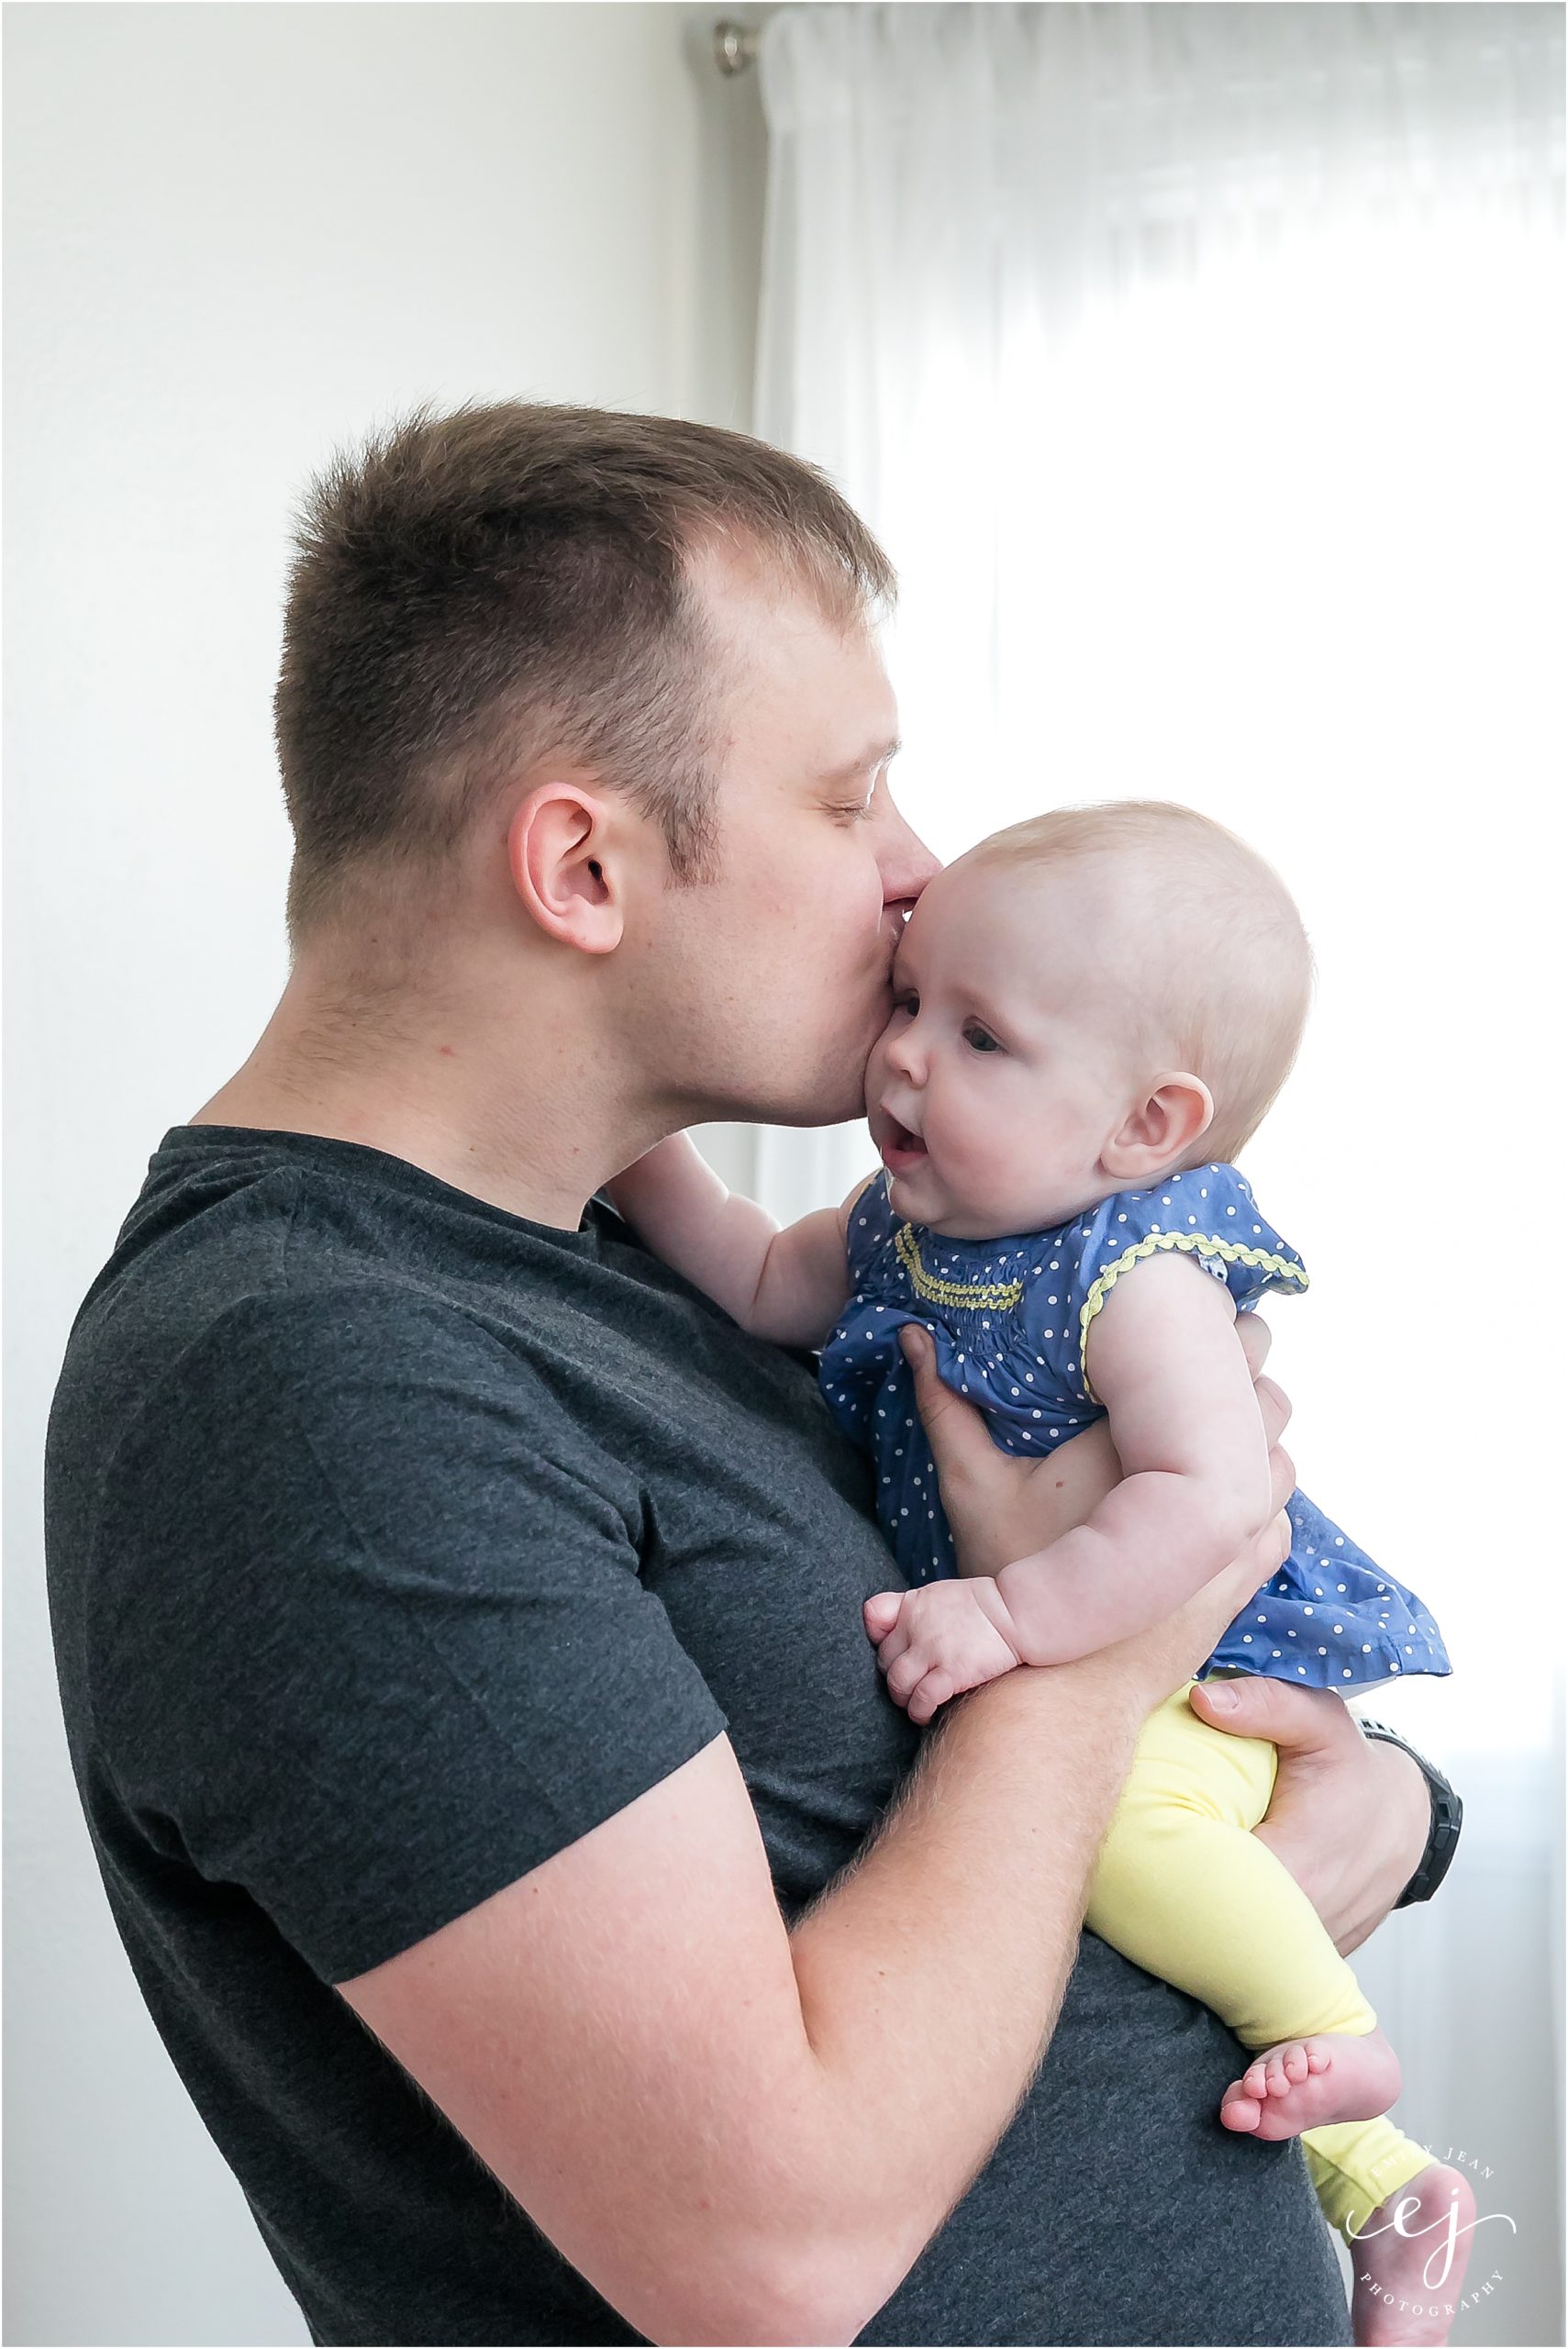 Daddy kissing baby daughter on the head